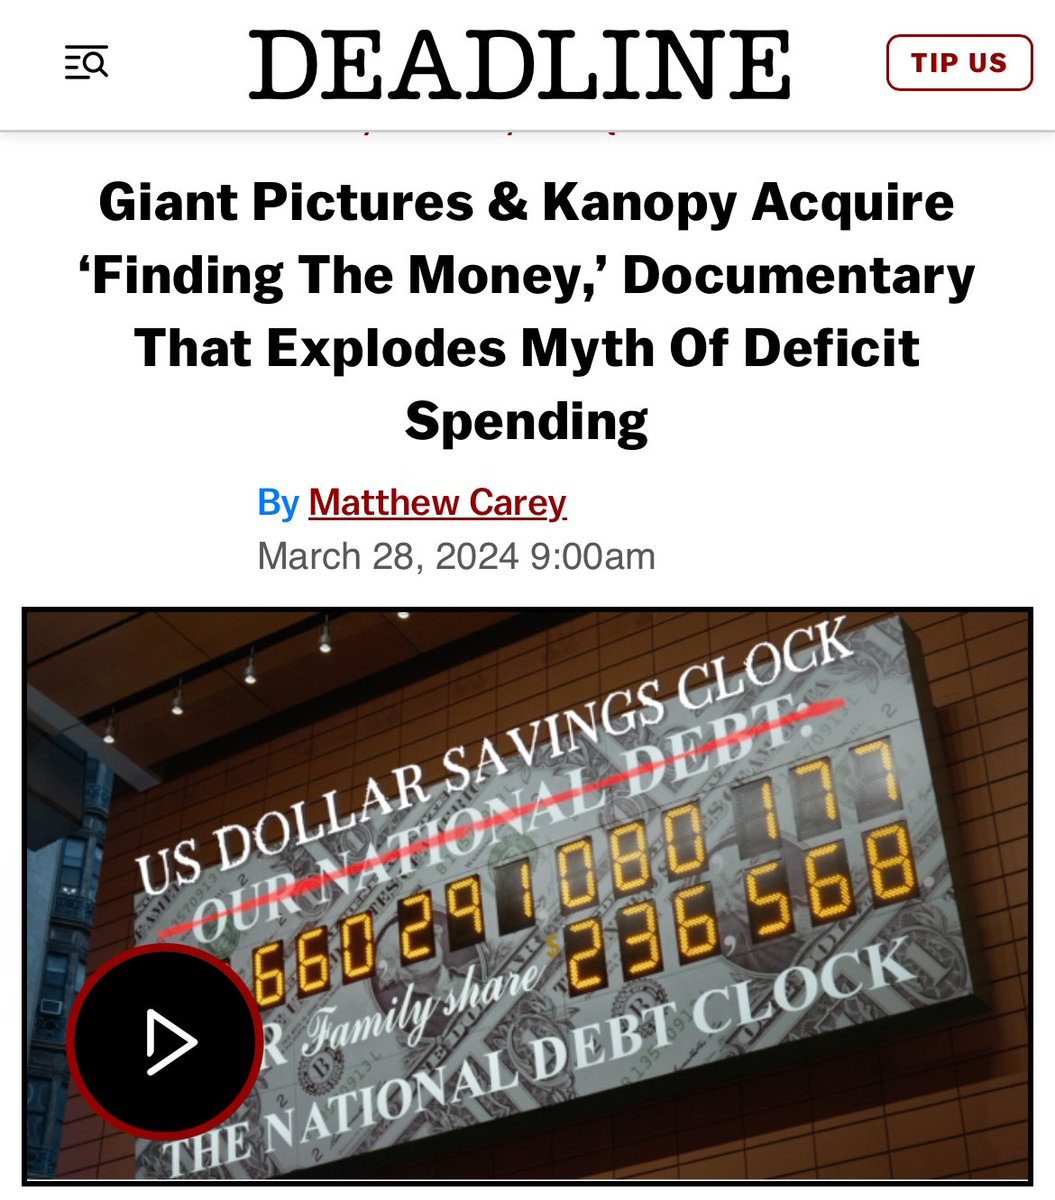 🎥 BIG MOVIE NEWS 🎥 🍿 Finding the Money will become available May 3 on digital platforms including Apple TV and Amazon. 🍿 deadline.com/video/finding-…